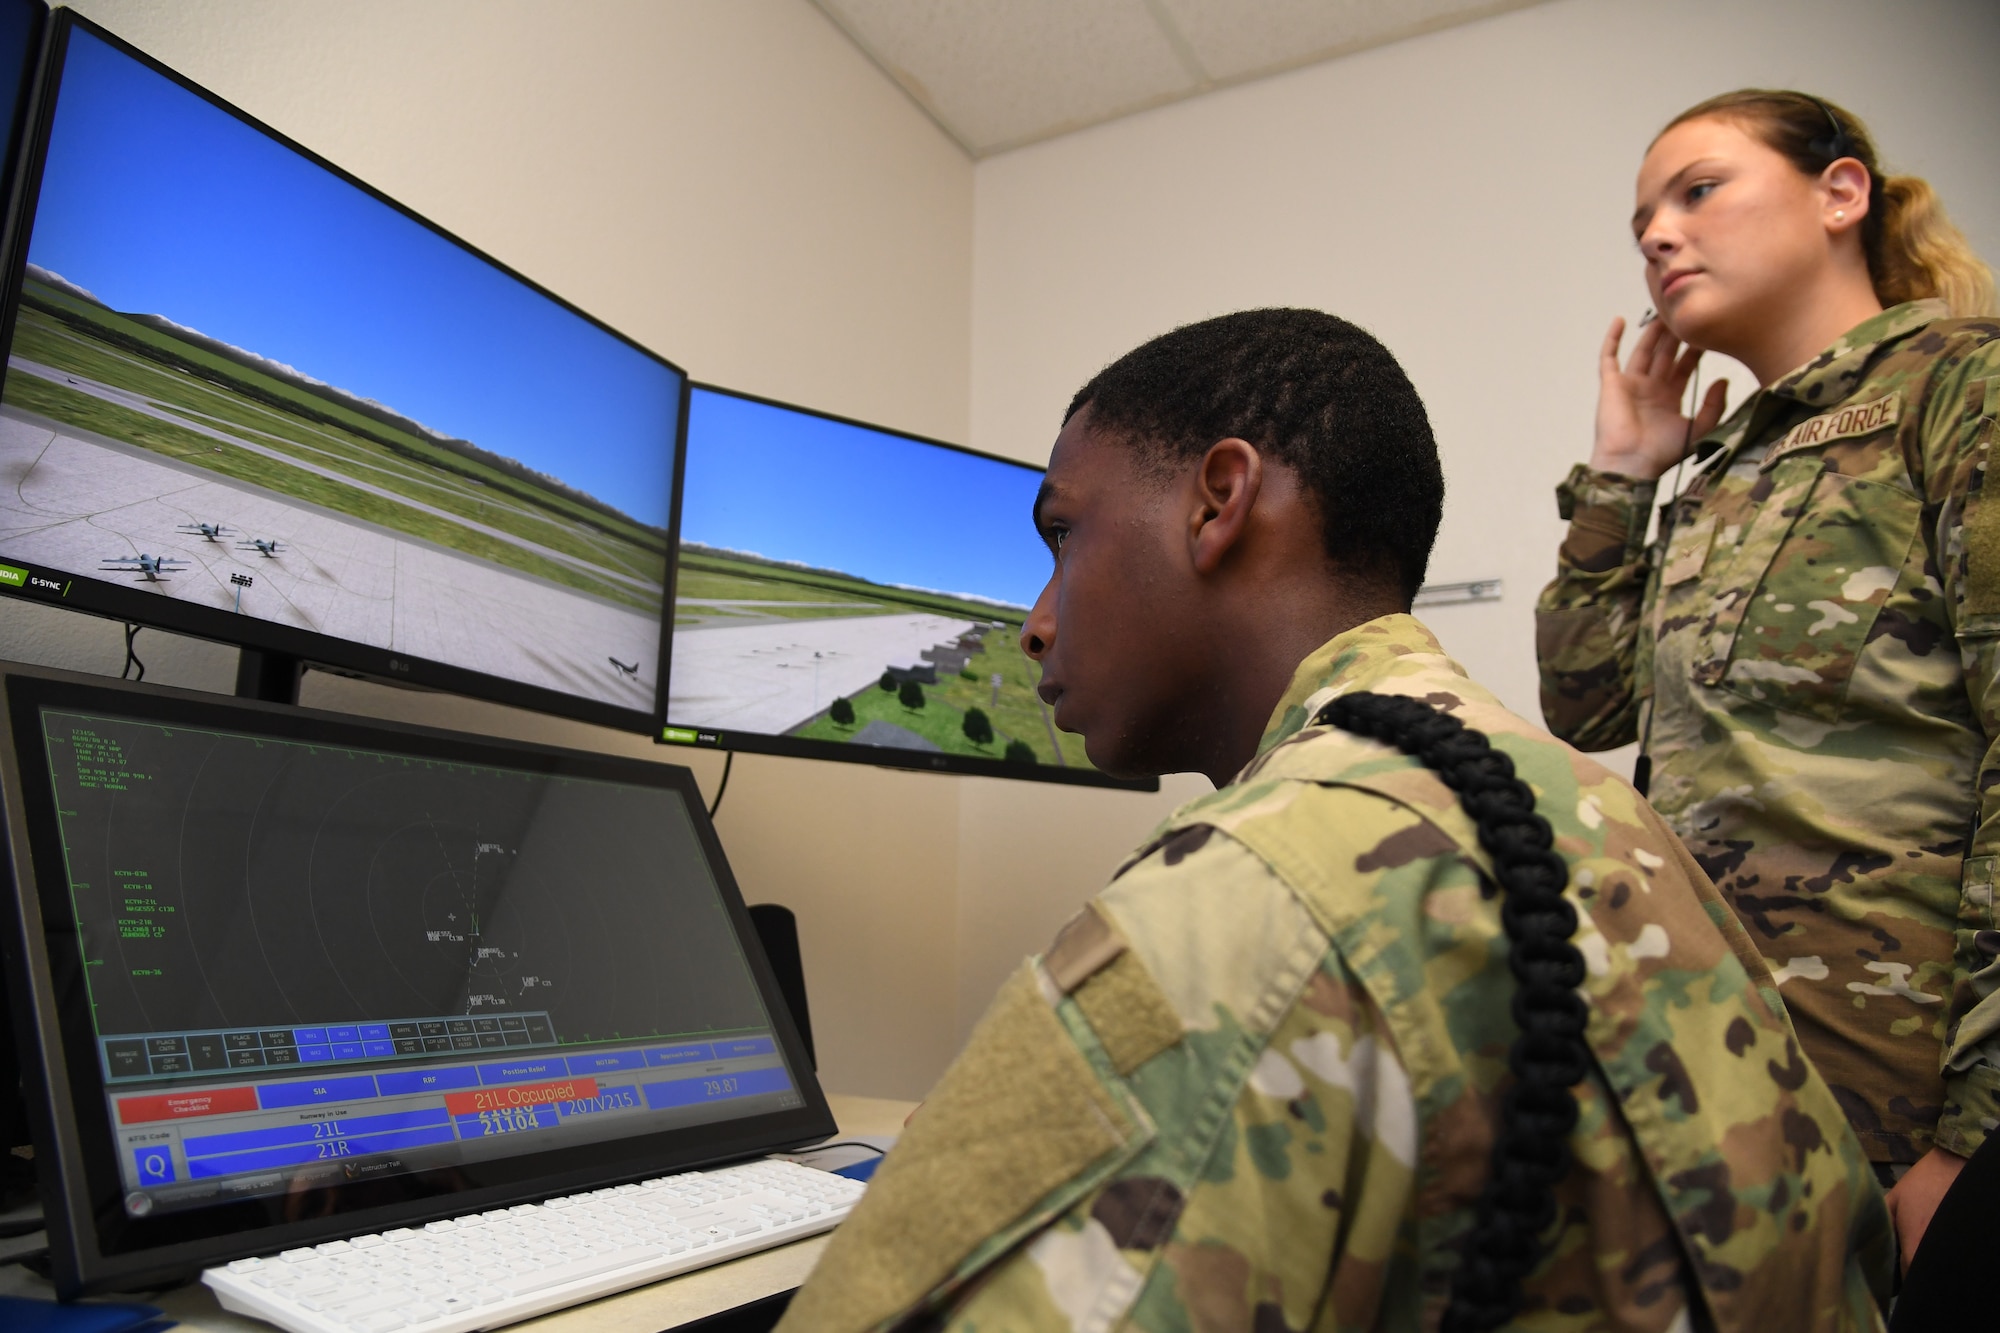 U.S. Air Force Airmen Jayden Ali and Isabella Fitzegerald, 334th Training Squadron students, use a condensed air traffic control tower simulator for training inside Erwin Manor at Keesler Air Force Base, Mississippi, April 13, 2022. Four trainers were installed to allow students the opportunity to increase tower control contact hours and to provide students additional study and familiarization time outside the classroom. (U.S. Air Force photo by Kemberly Groue)